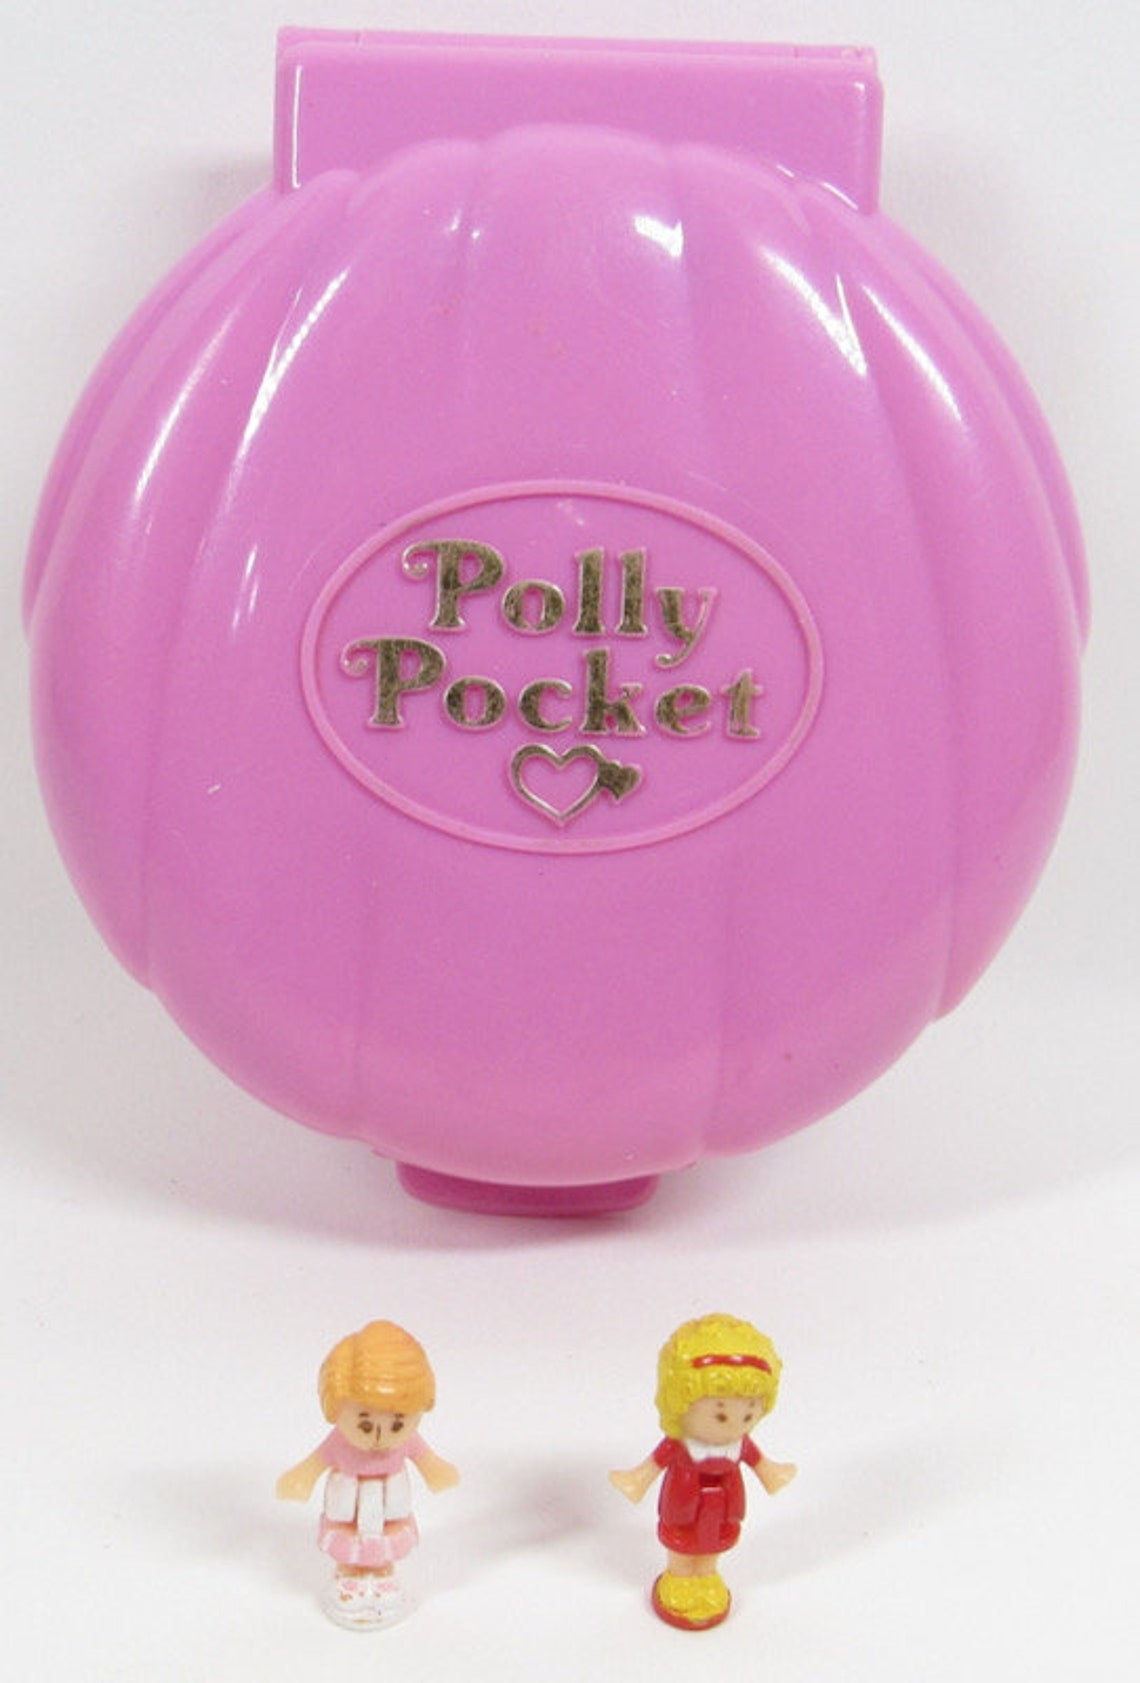 Pink Polly Pocket case with two Polly dolls standing in front of it